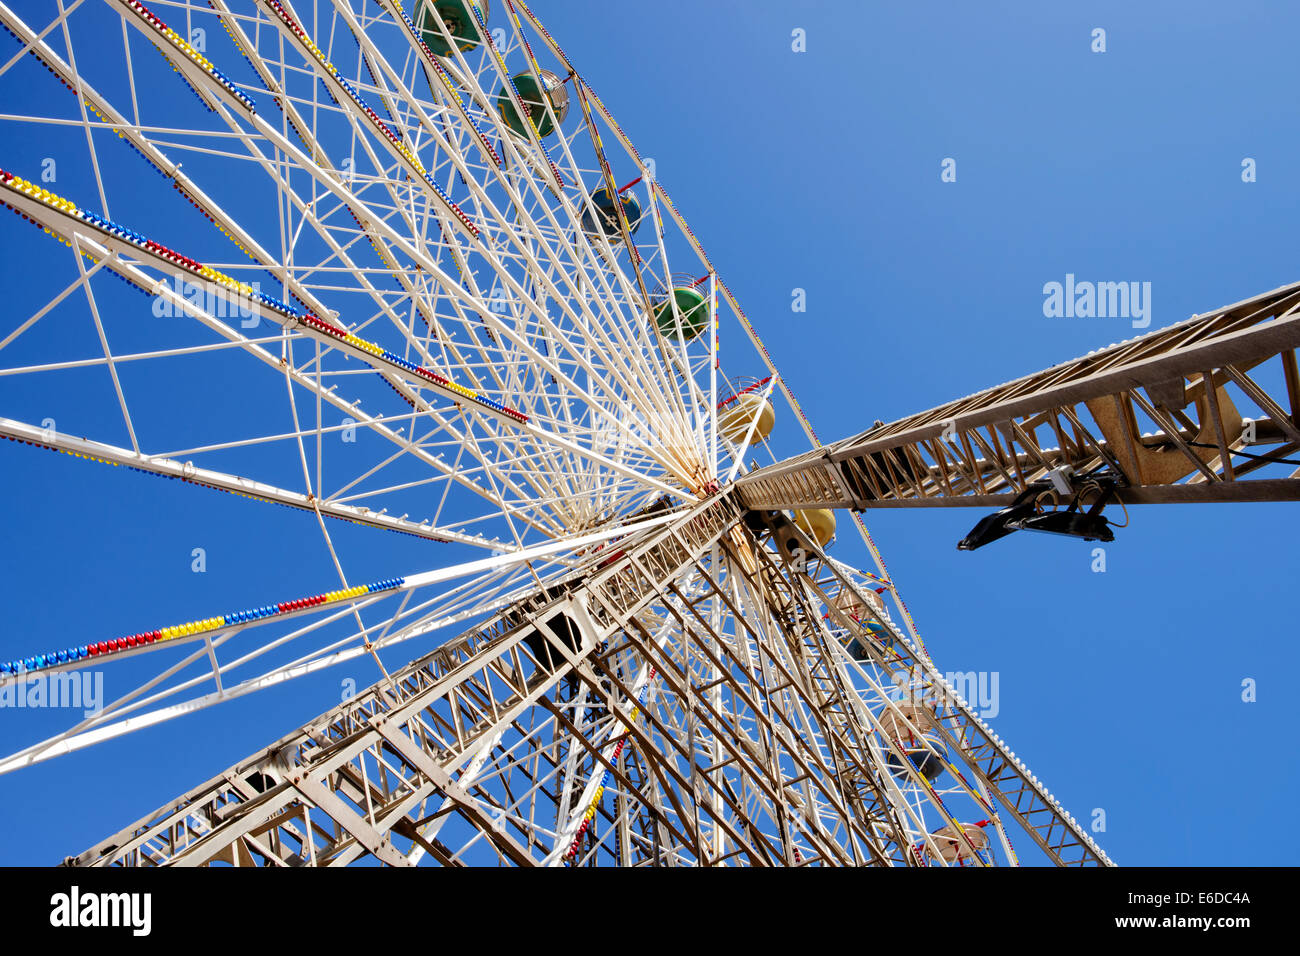 Close Up detail of Ferris Wheel on Central Pier in Blackpool, Lancashire. UK Stock Photo